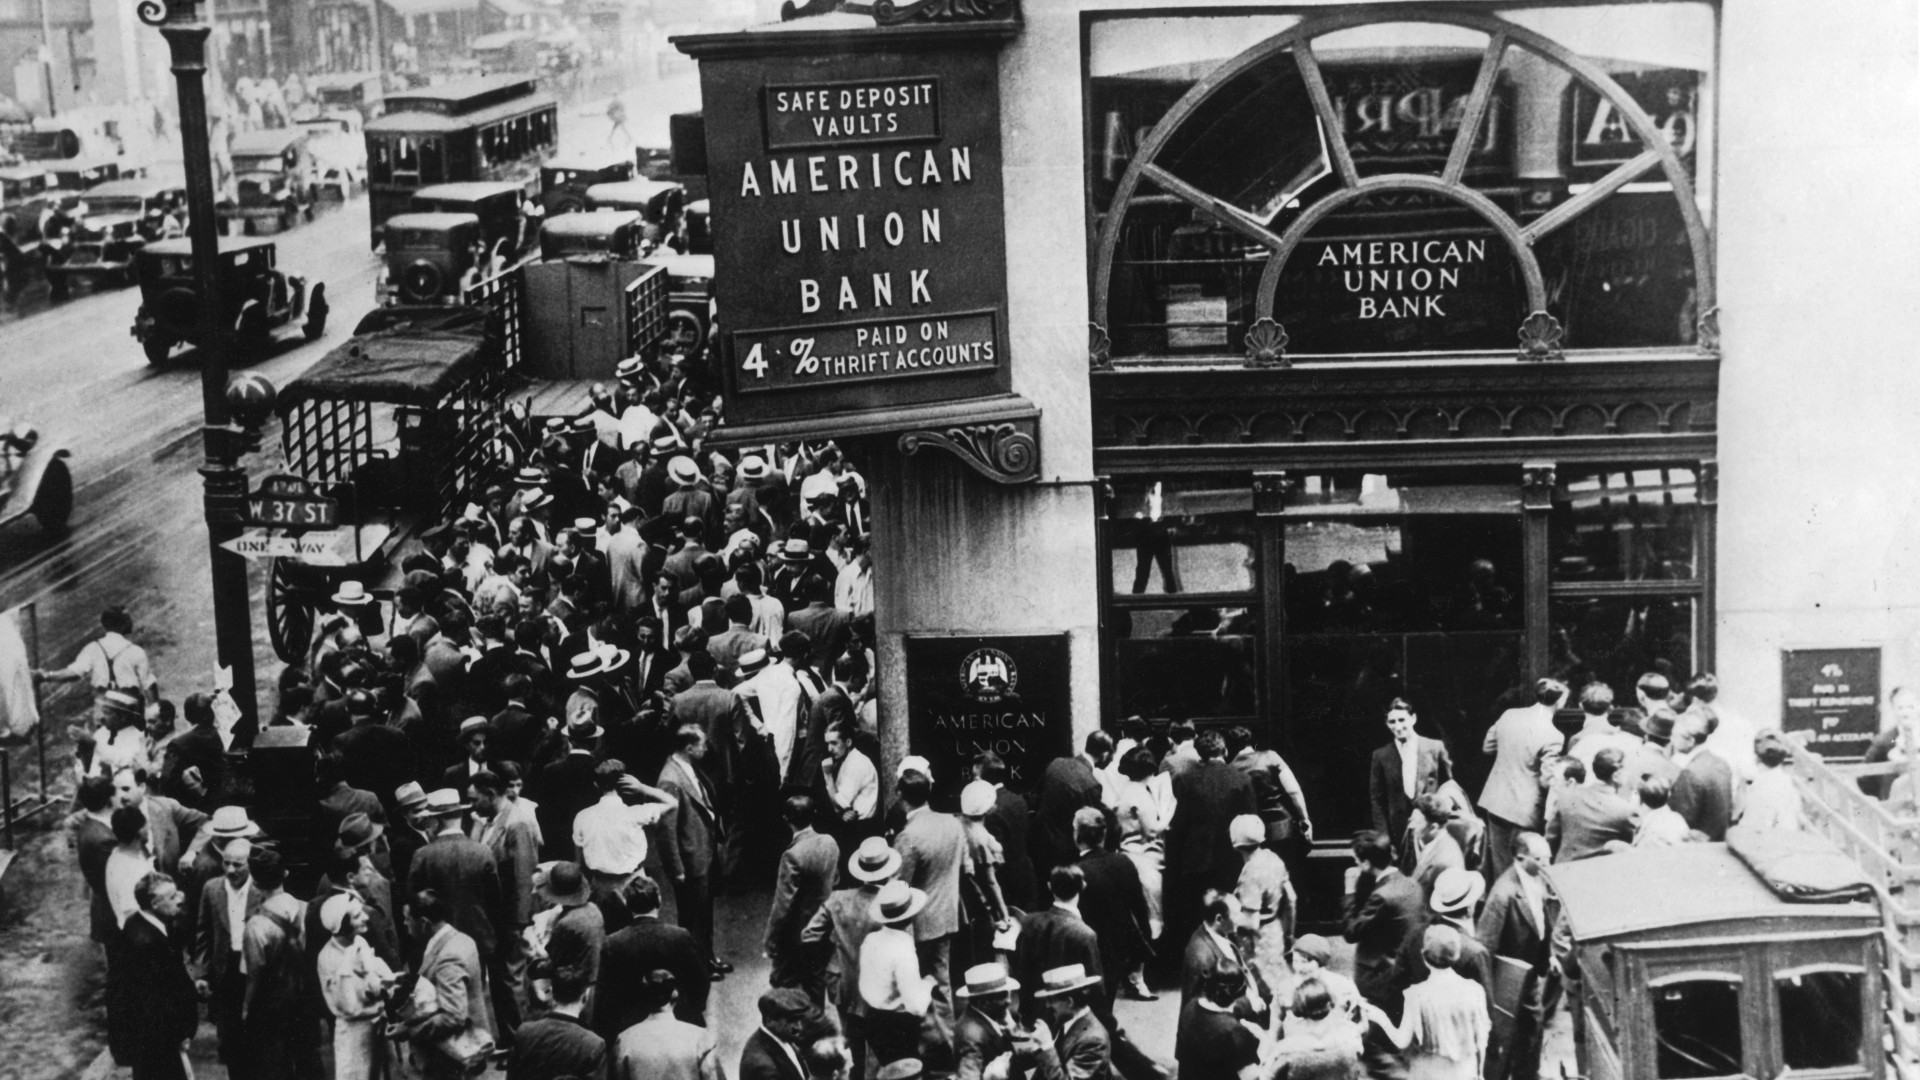 Chaos outside the American Union Bank of New York in 1931